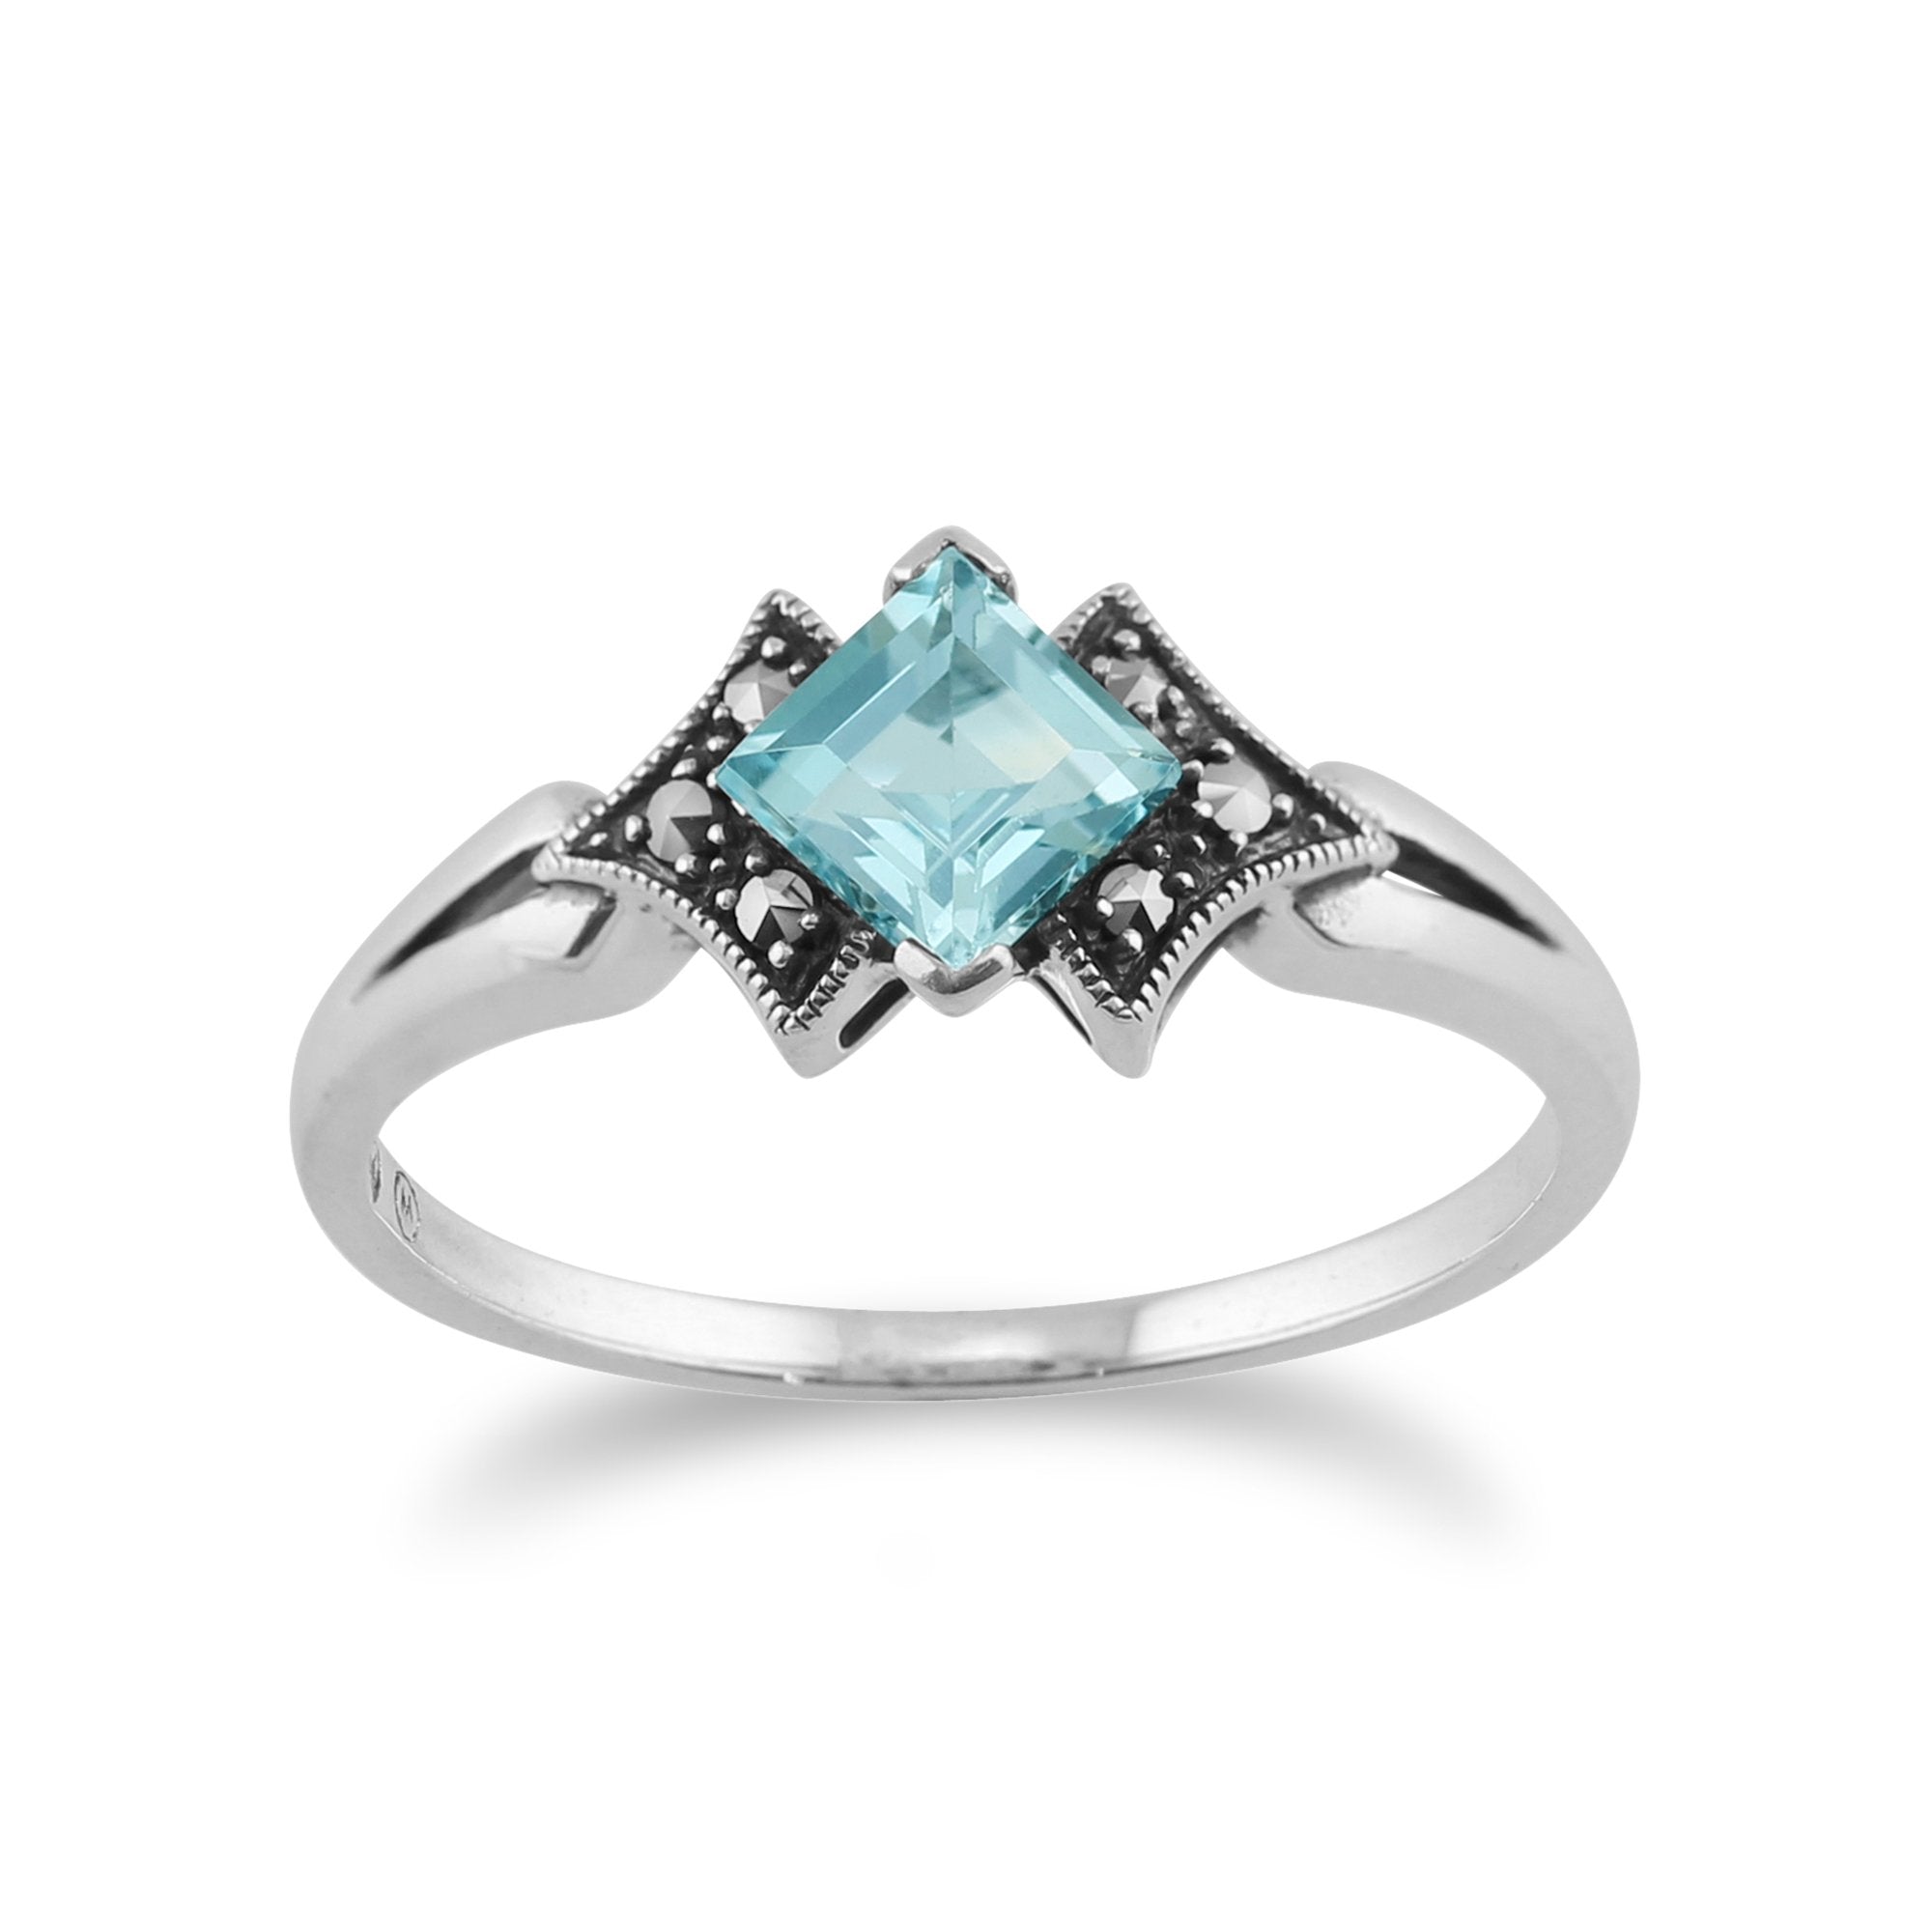 Art Deco Style Square Blue Topaz & Marcasite Ring in 925 Sterling Silver